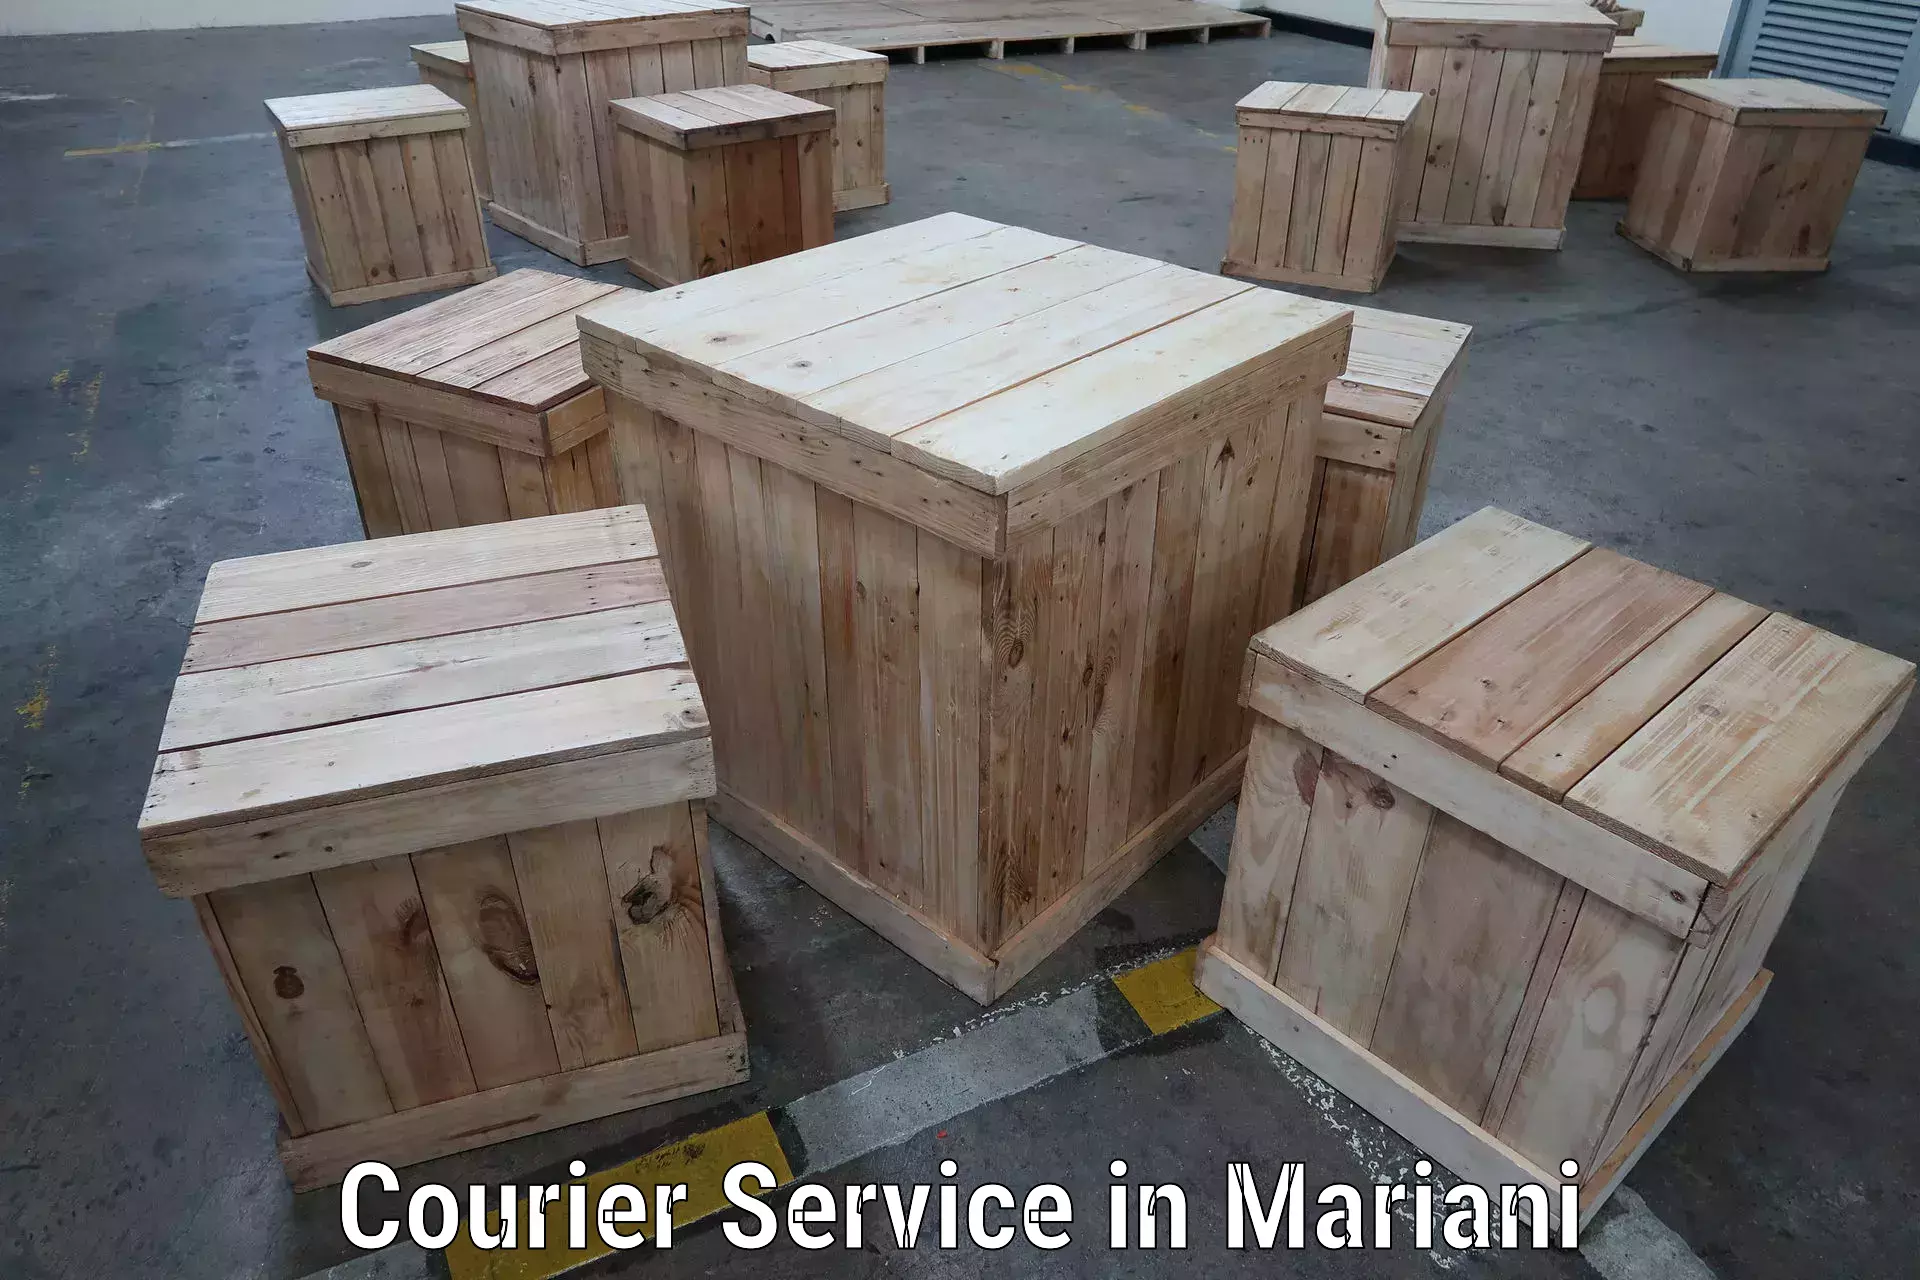 Parcel handling and care in Mariani